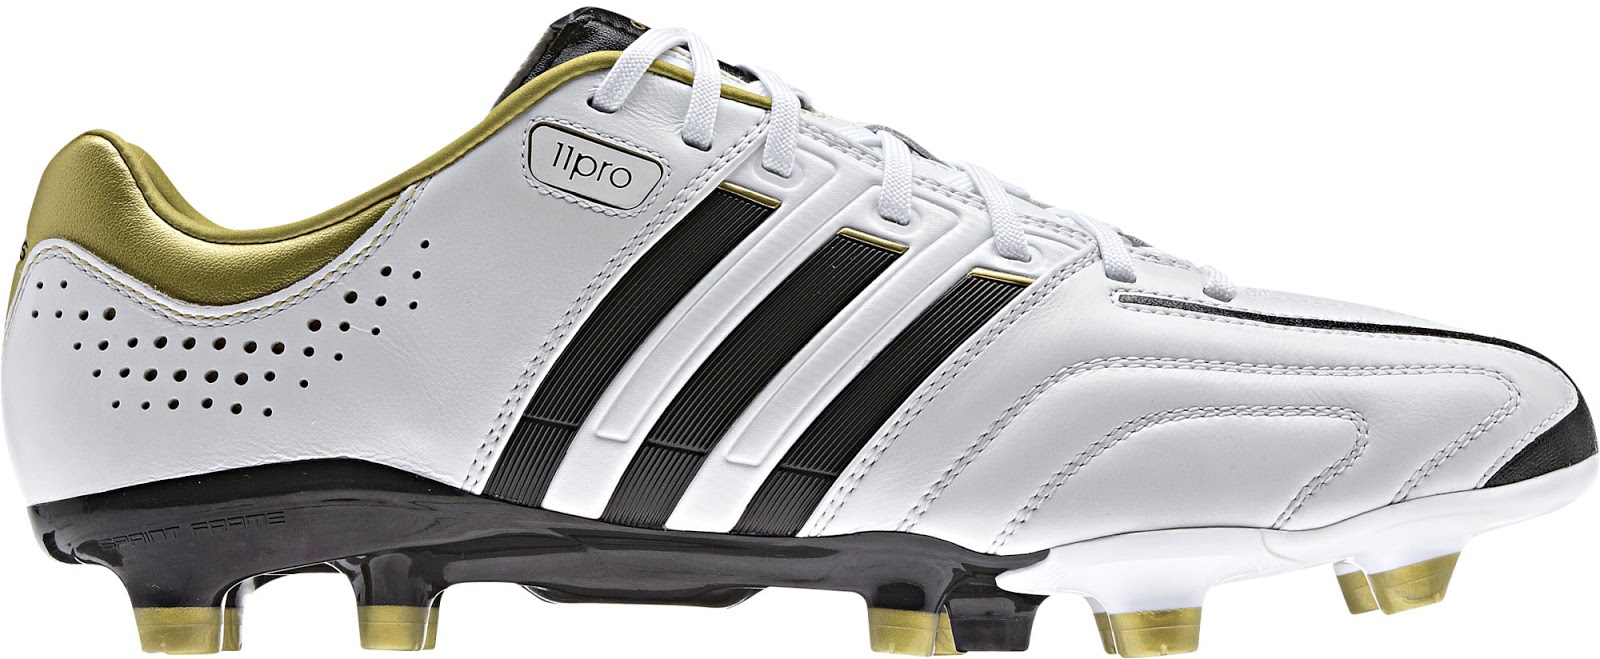 Adidas Adipure White / Gold Colorway Released - Footy Headlines